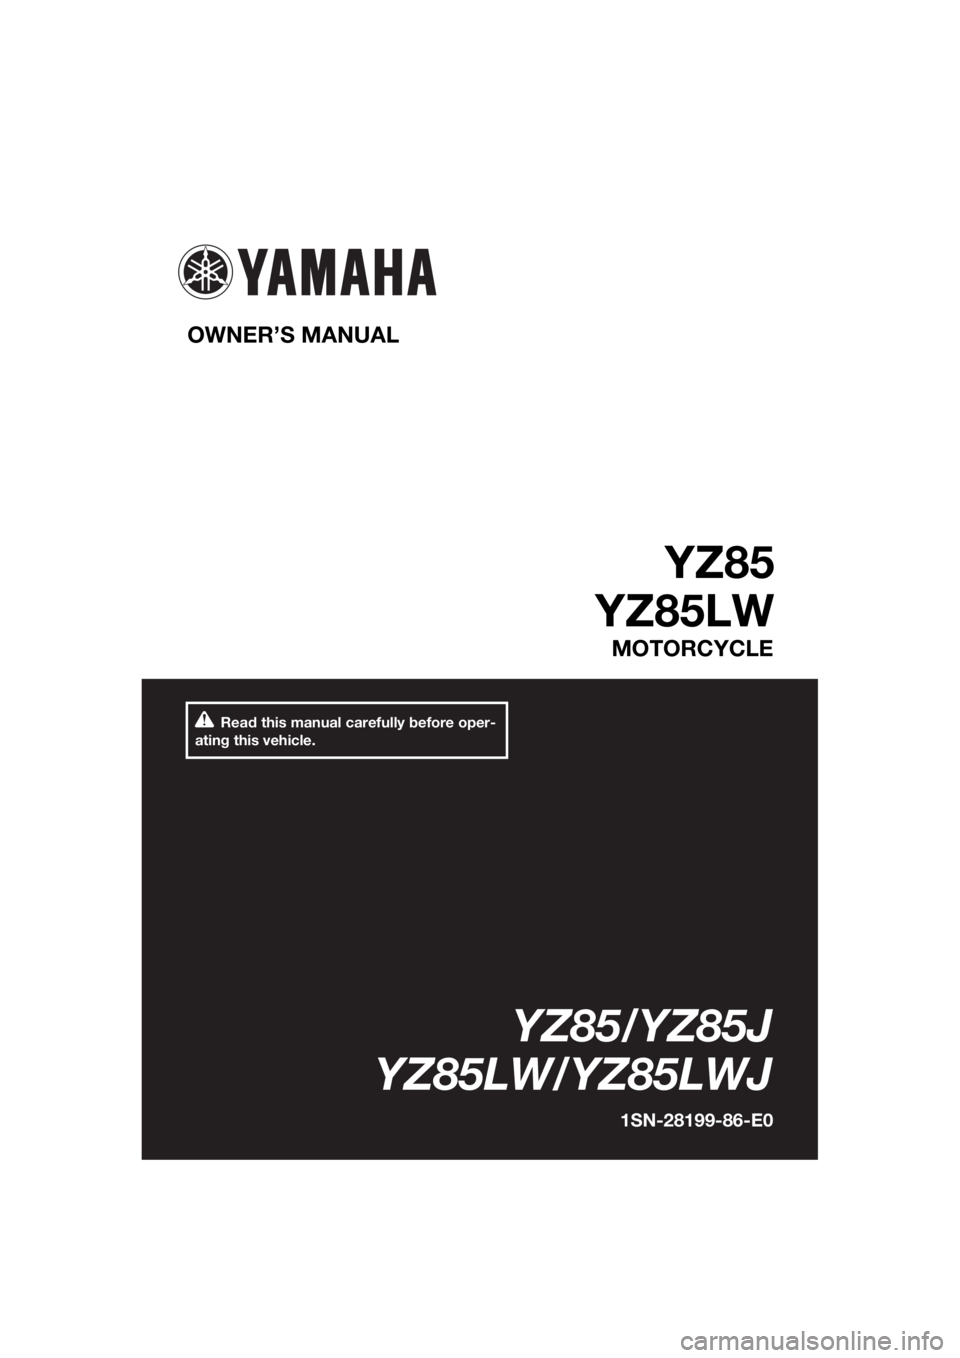 YAMAHA YZ85 2018  Owners Manual Read this manual carefully before oper-
ating this vehicle.
OWNER’S MANUAL 
YZ85
YZ85LW
MOTORCYCLE
YZ85/YZ85J
YZ85LW/YZ85LWJ
1SN-28199-86-E0
U1SN86E0.book  Page 1  Wednesday, June 7, 2017  10:21 AM 